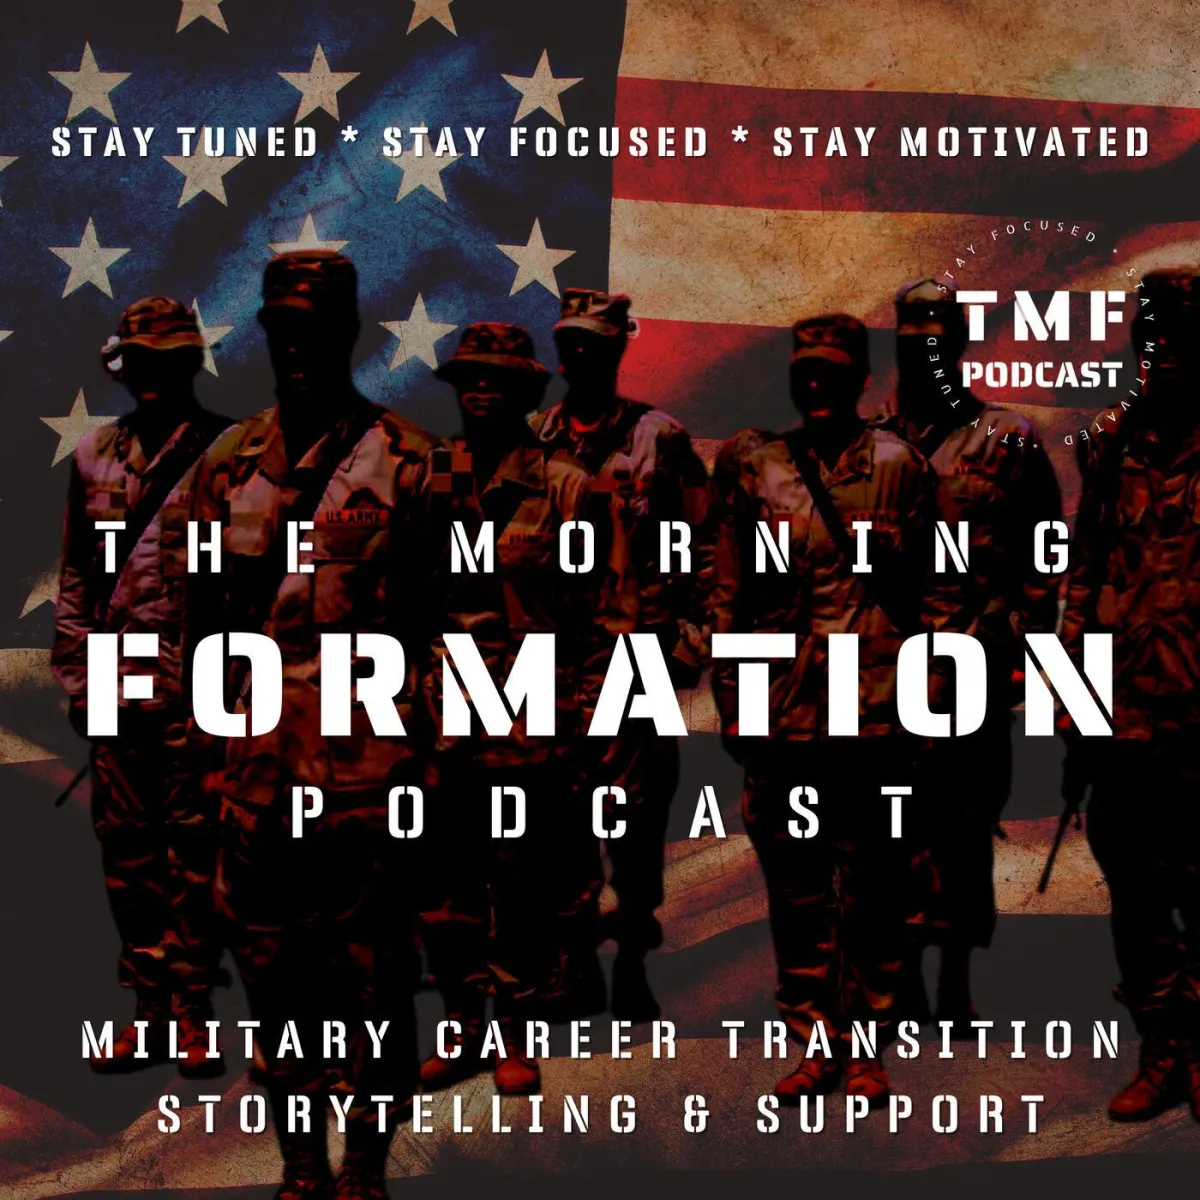 morning formation podcast